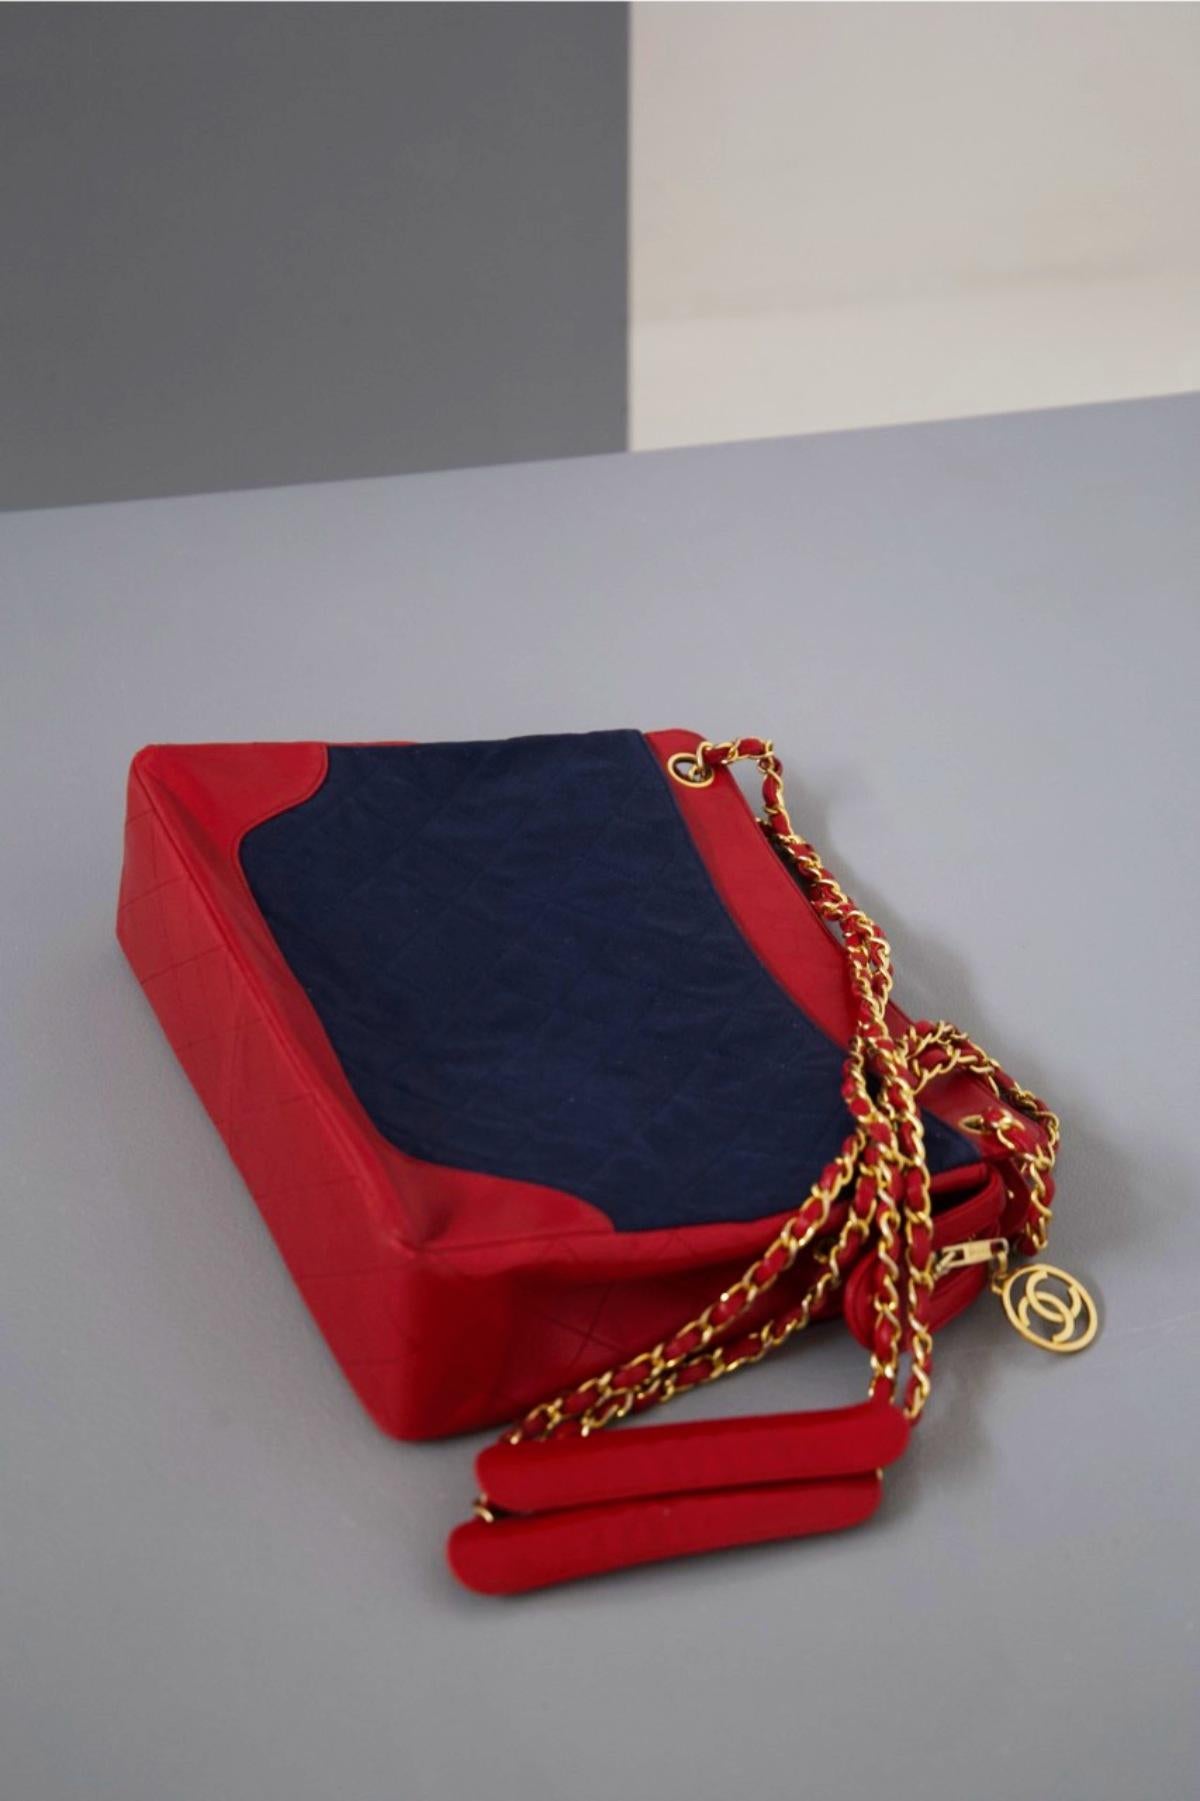 Rare Chanel Shoulder Bag in Red Leather and Denim Fabric For Sale 2